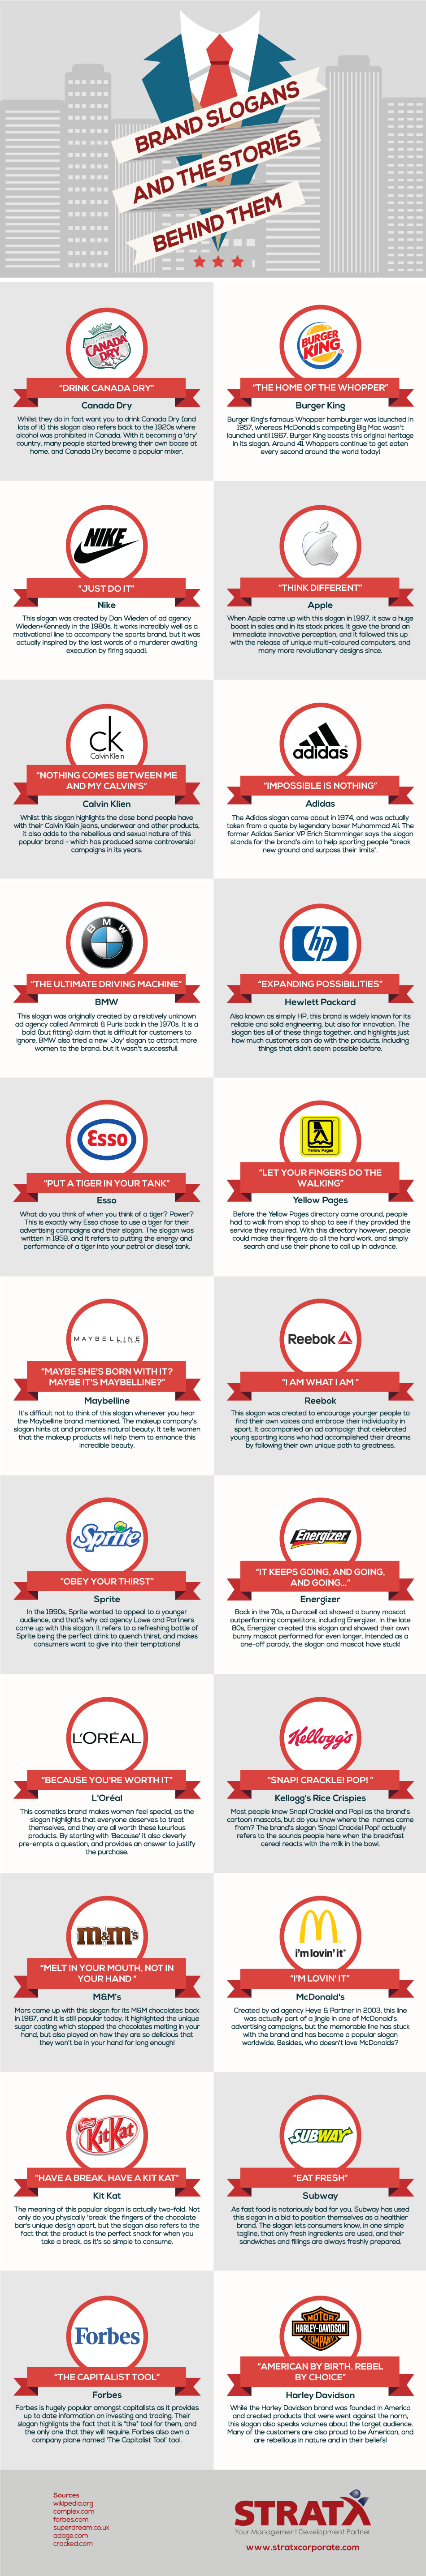 Brand Slogans And The Stories Behind Them